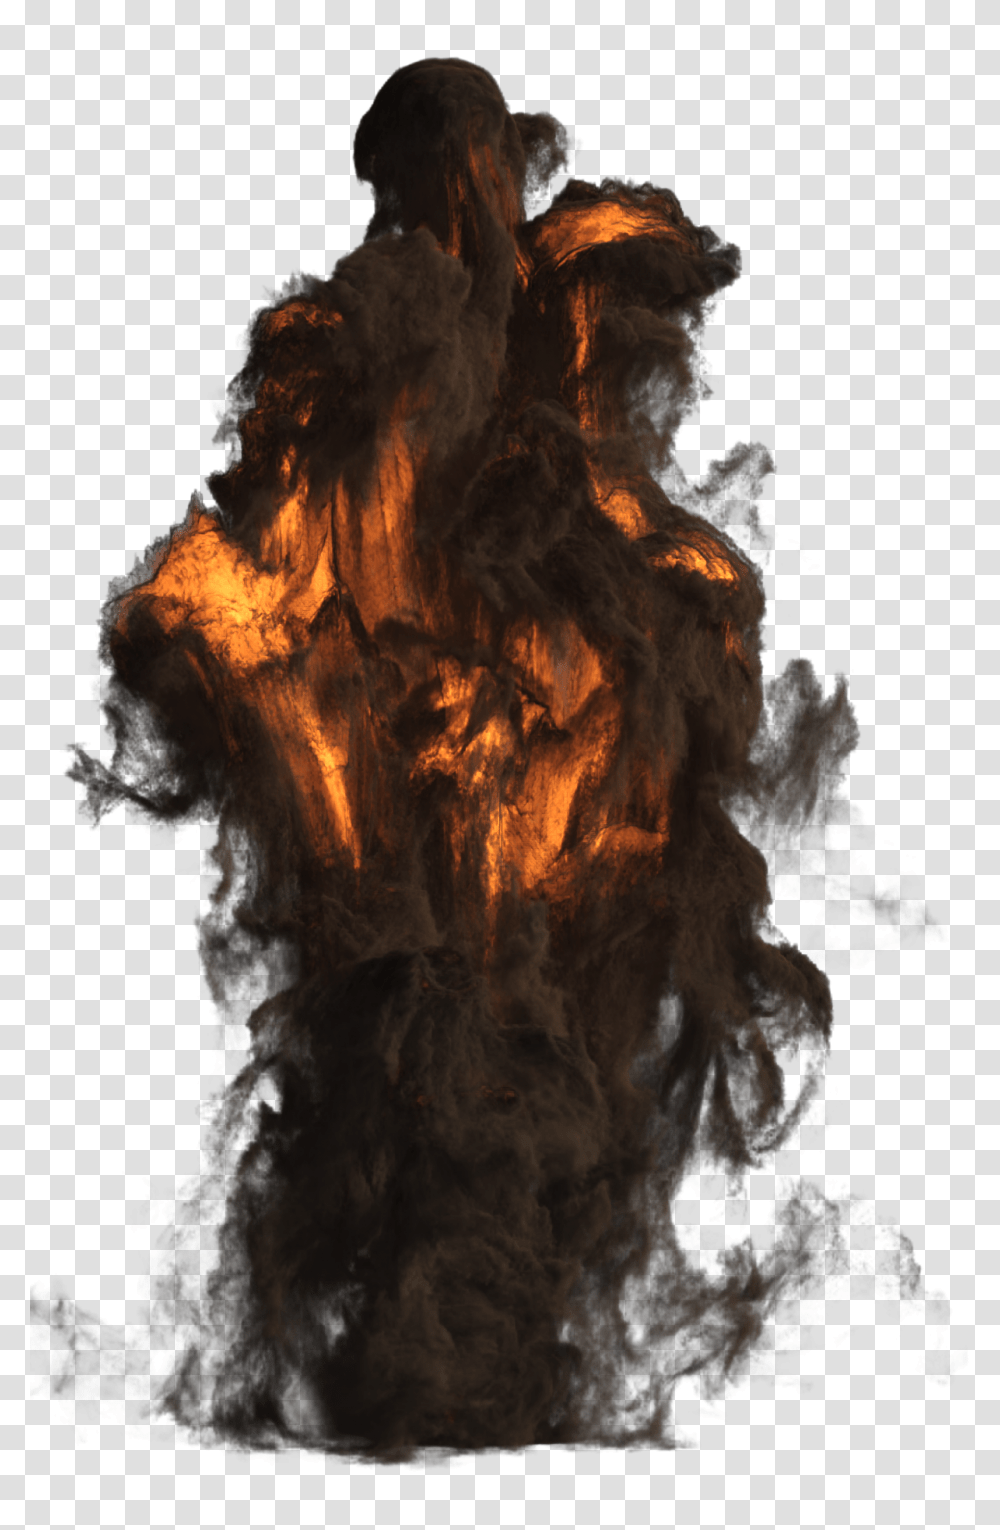 Explosion 4 By Gamekiller48, Weapon Transparent Png